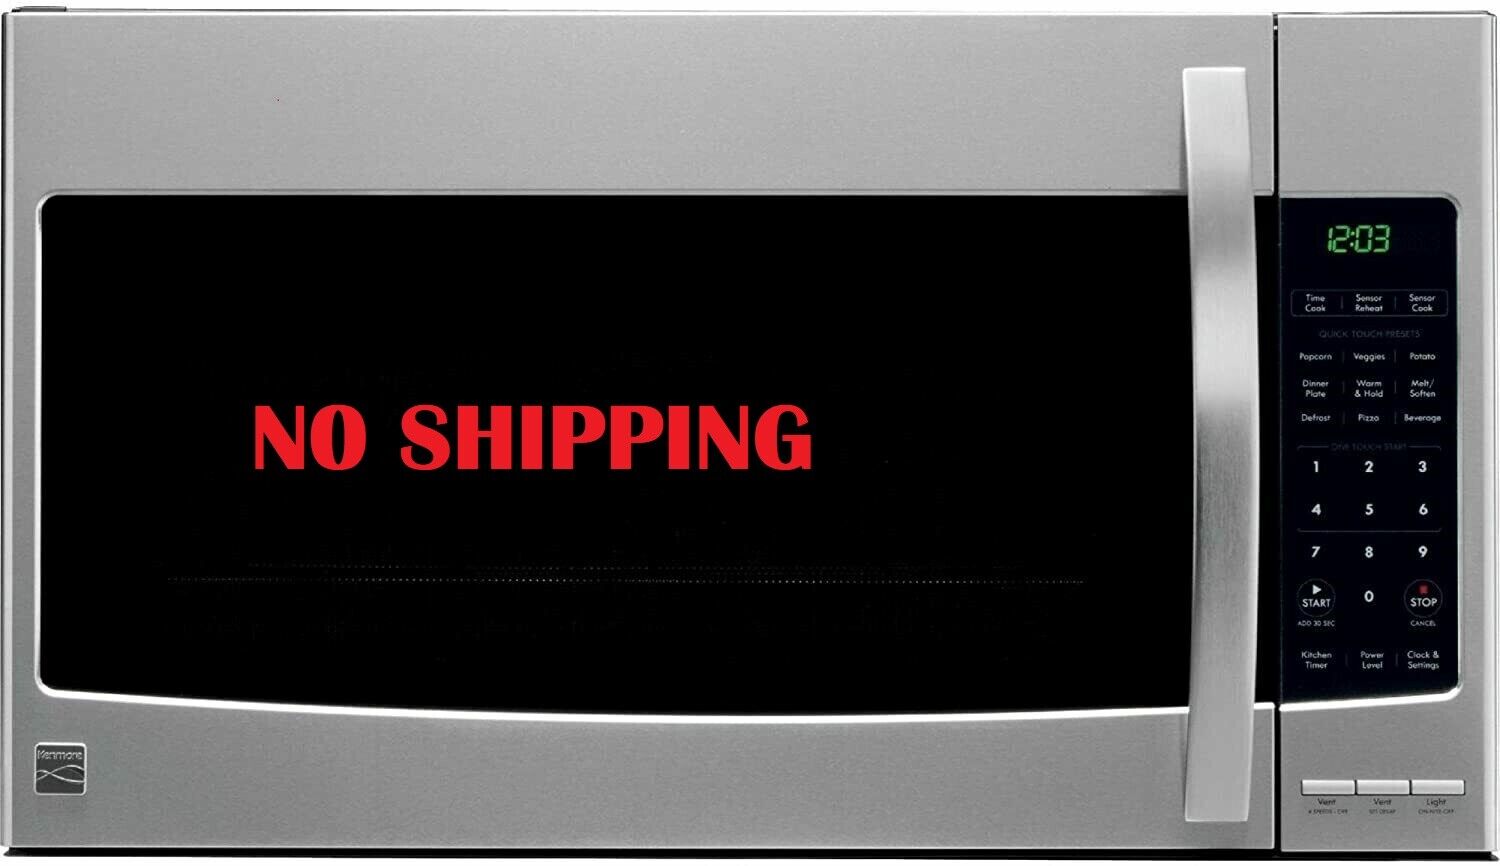 NO SHIPG Kenmore 80353 Stainless Over 2021new shipping free Super-cheap Steel Microwave the Range